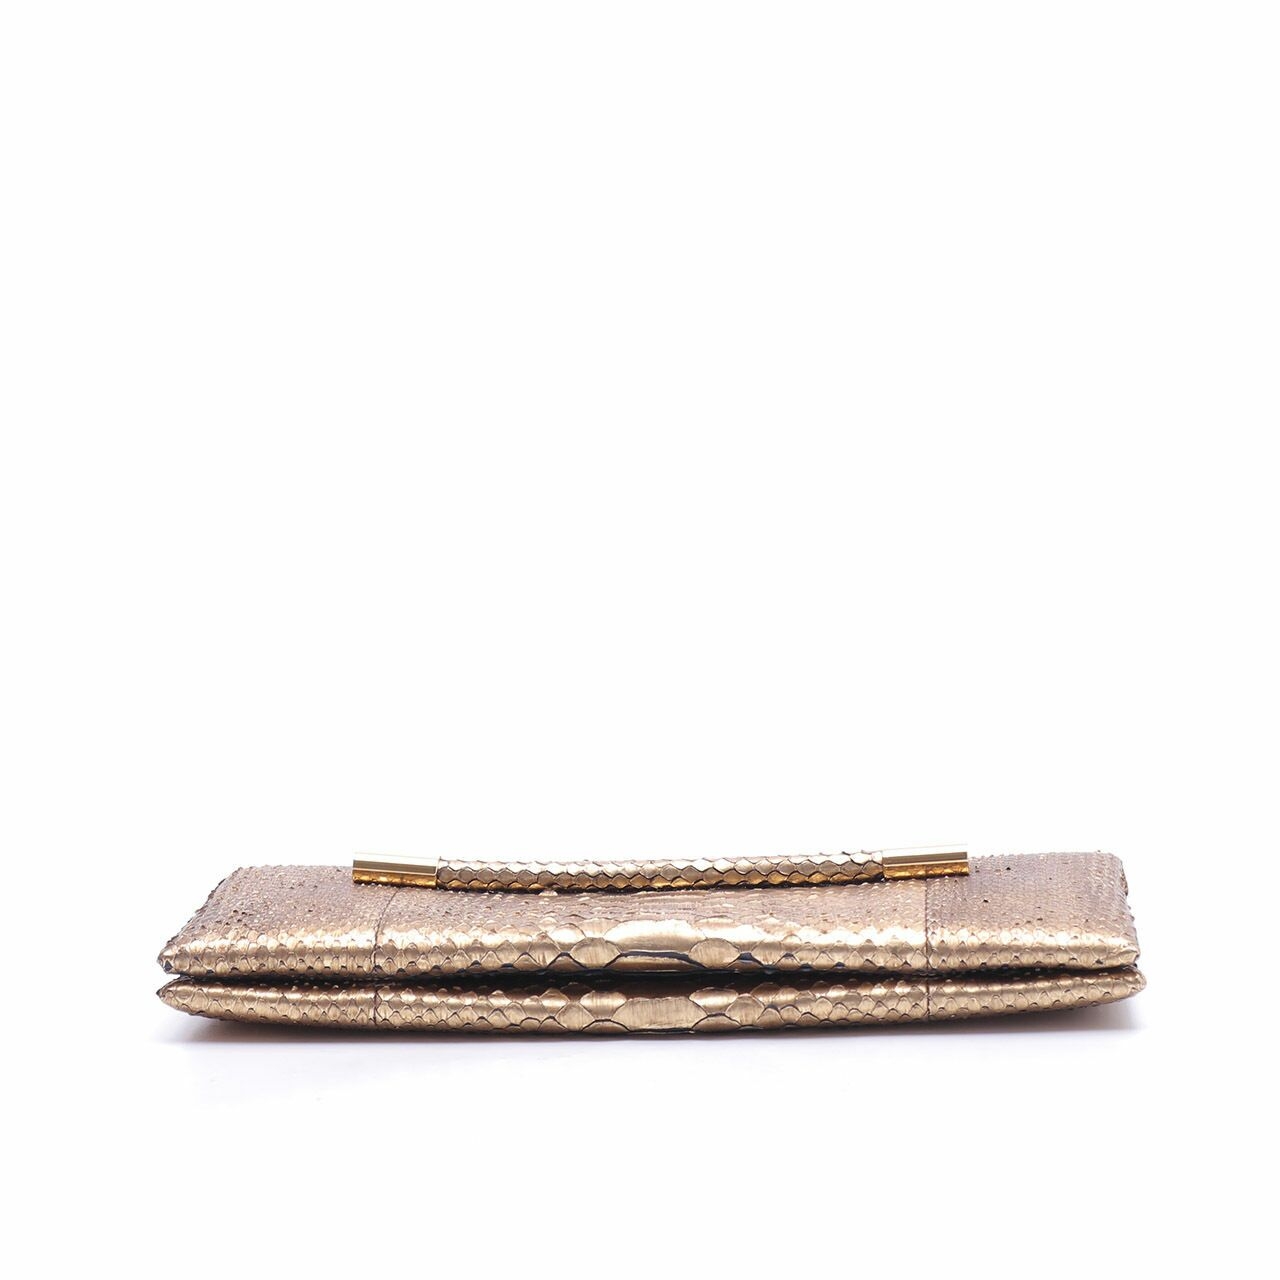 Tom Ford Small Clutch With Handle in Python Leather Gold Clutch